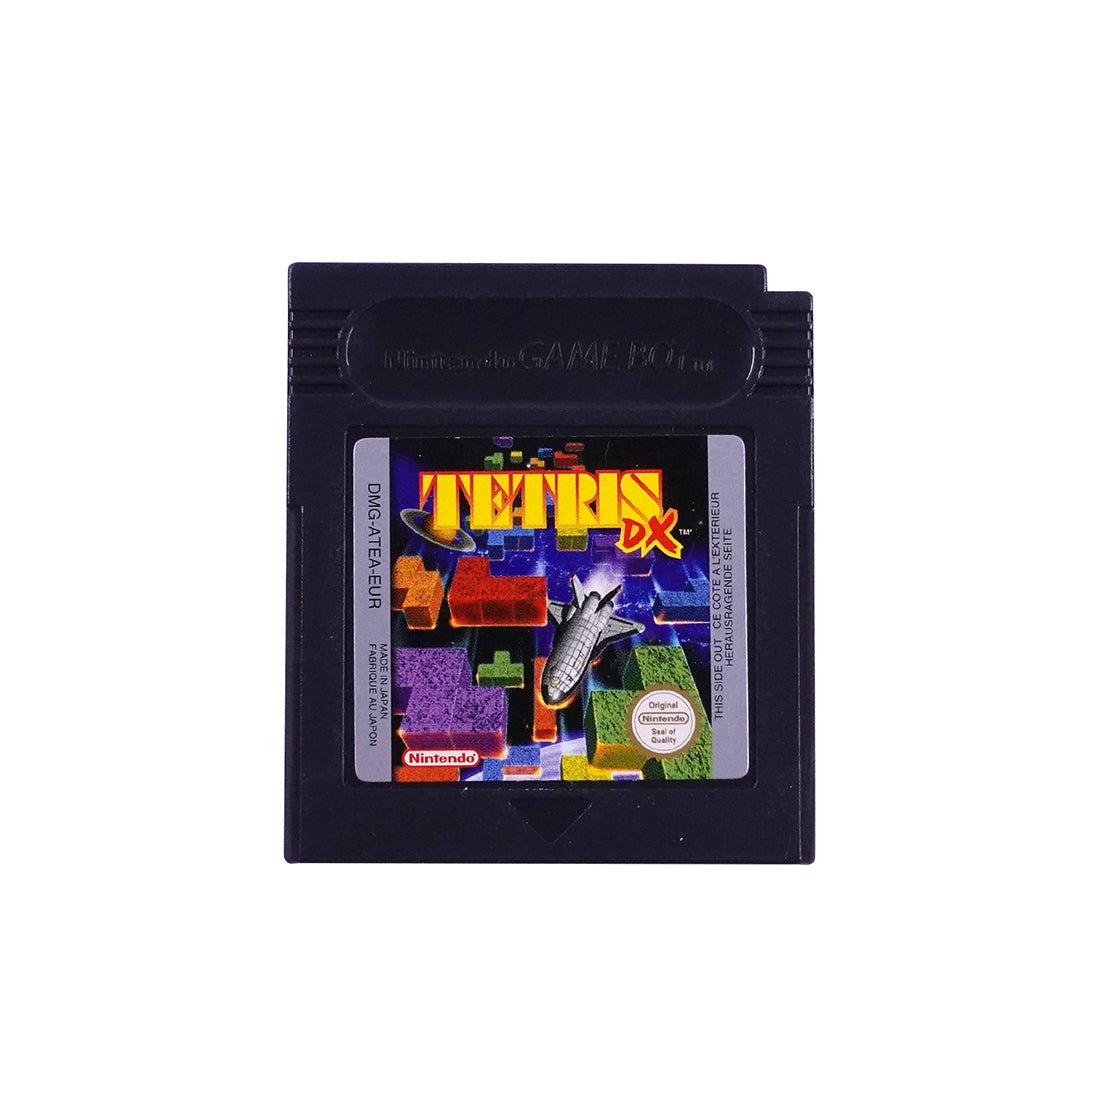 (Pre-Owned) Tetris Dx - Gameboy Classic - Store 974 | ستور ٩٧٤